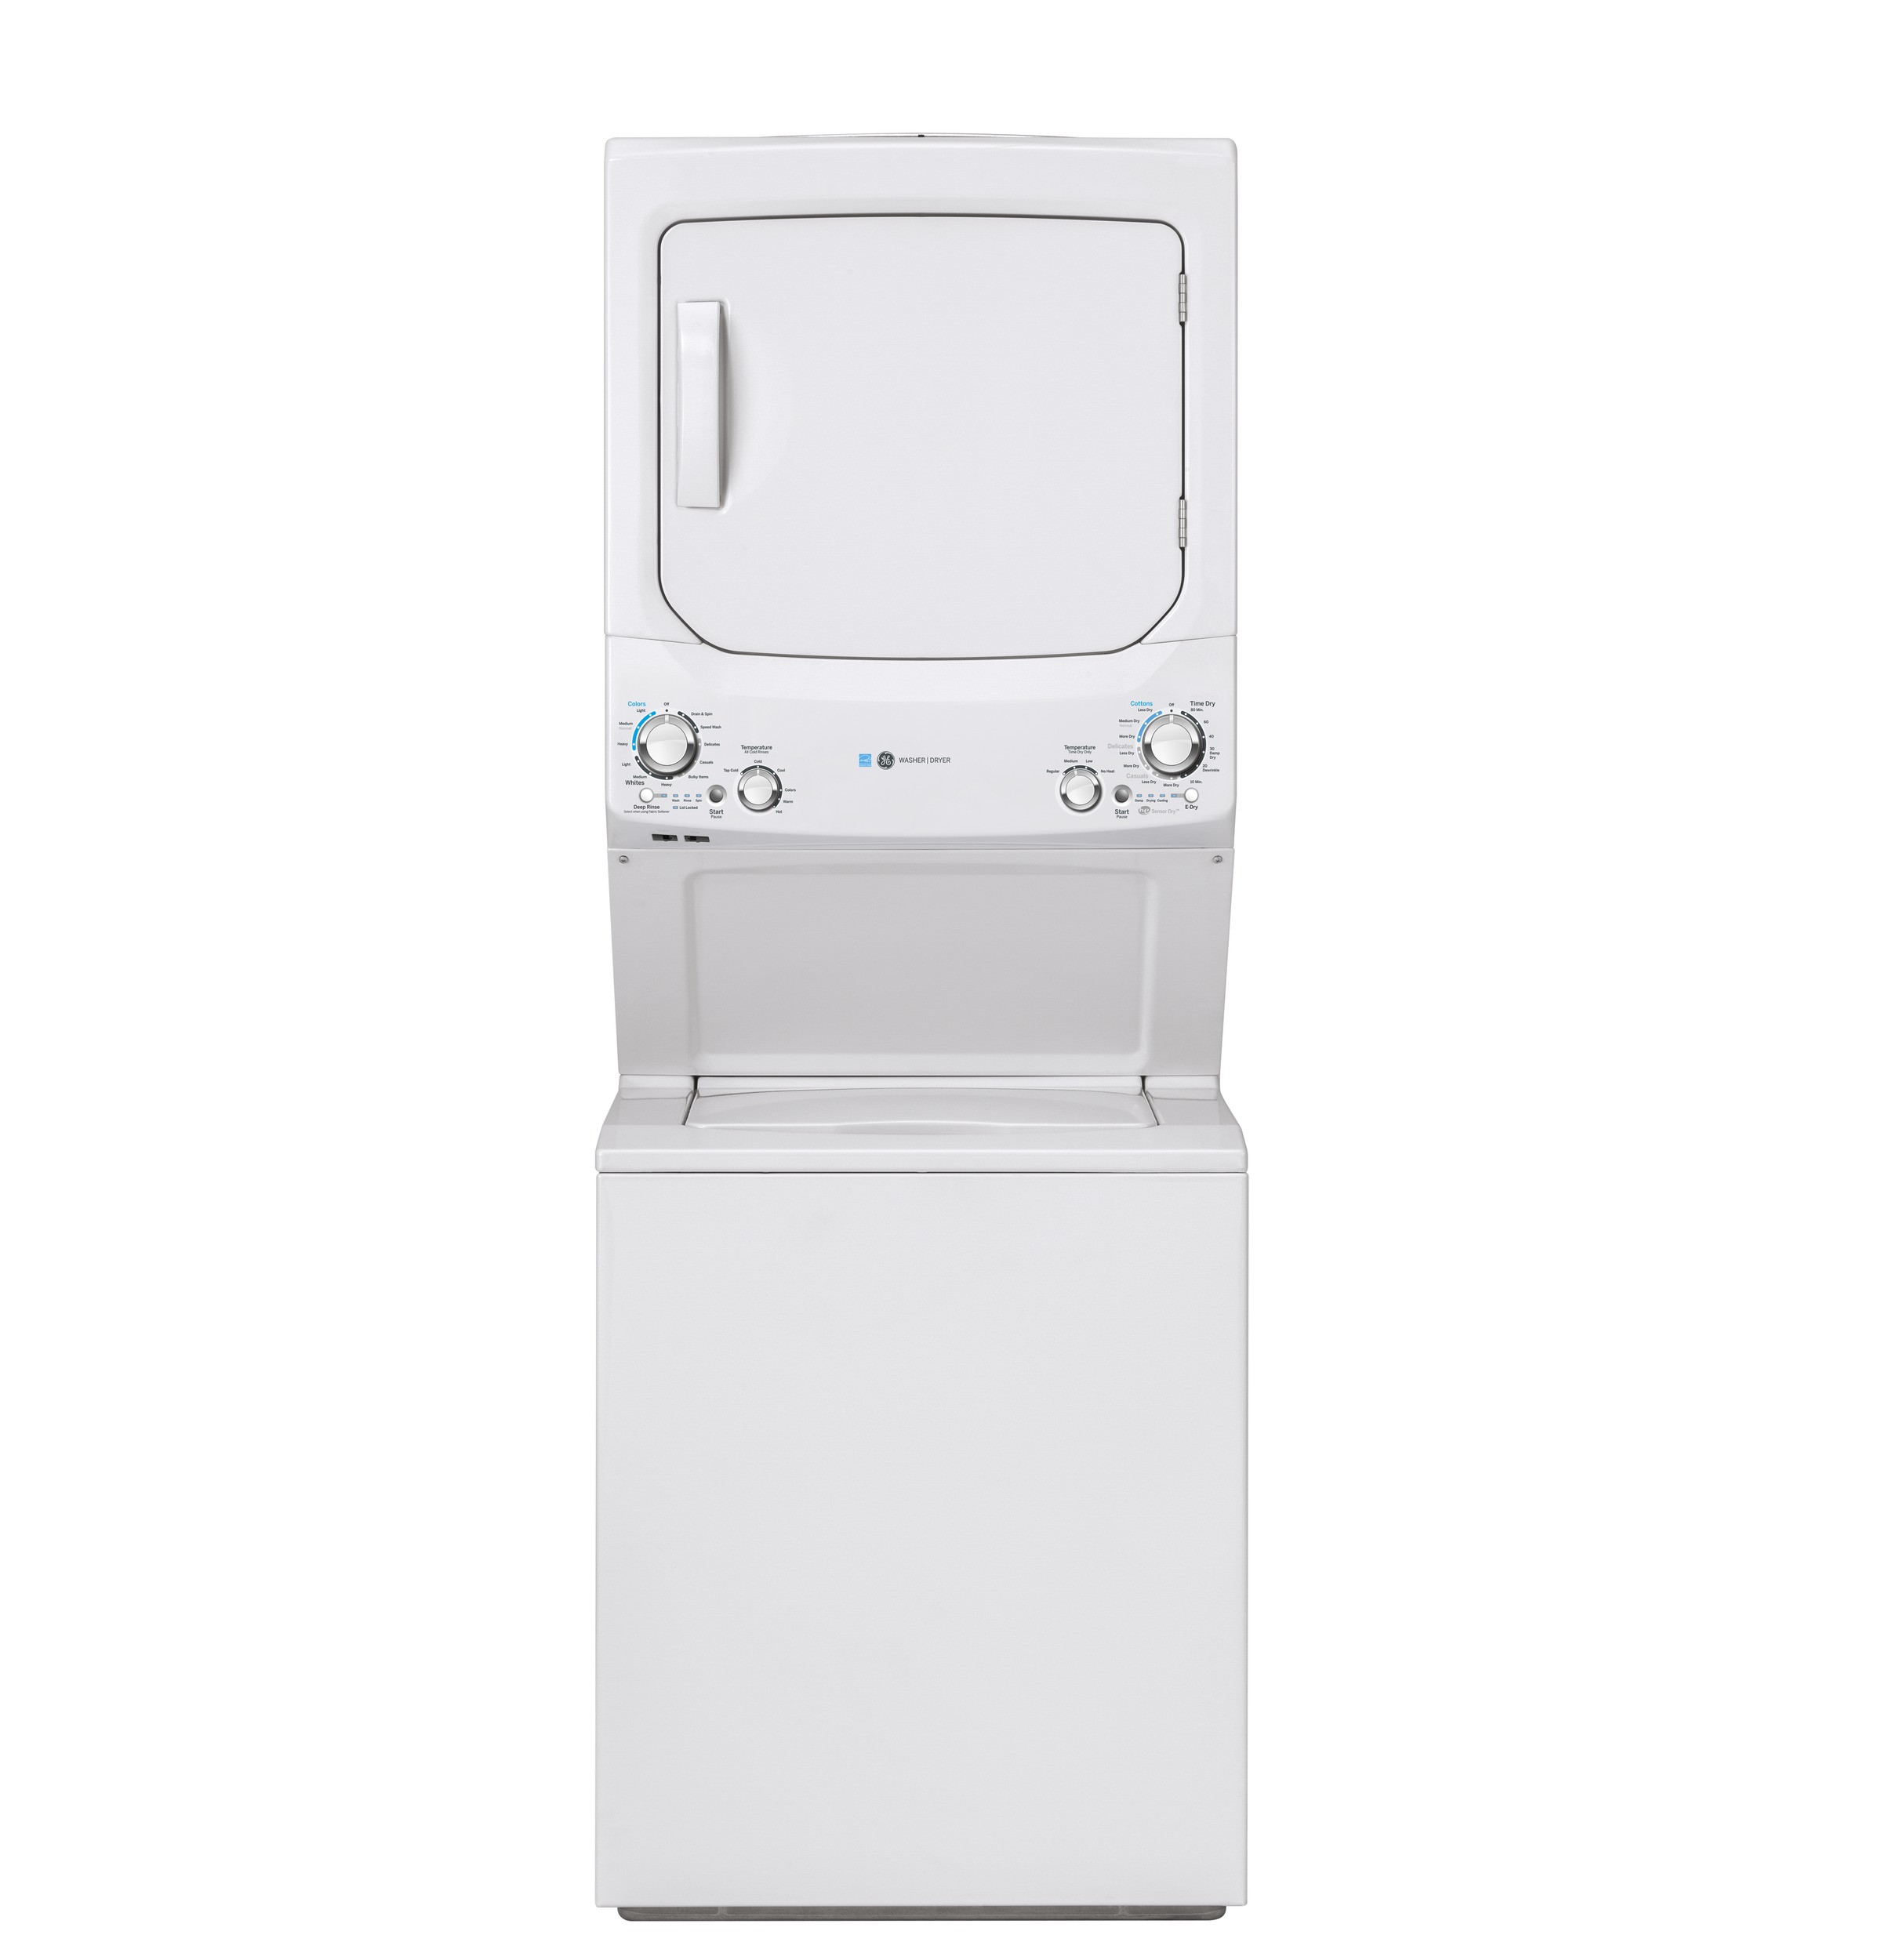 GE Unitized Spacemaker® ENERGY STAR® 3.9 cu. ft. Capacity Washer with Stainless Steel Basket and 5.9 cu. ft. Capacity Electric Dryer